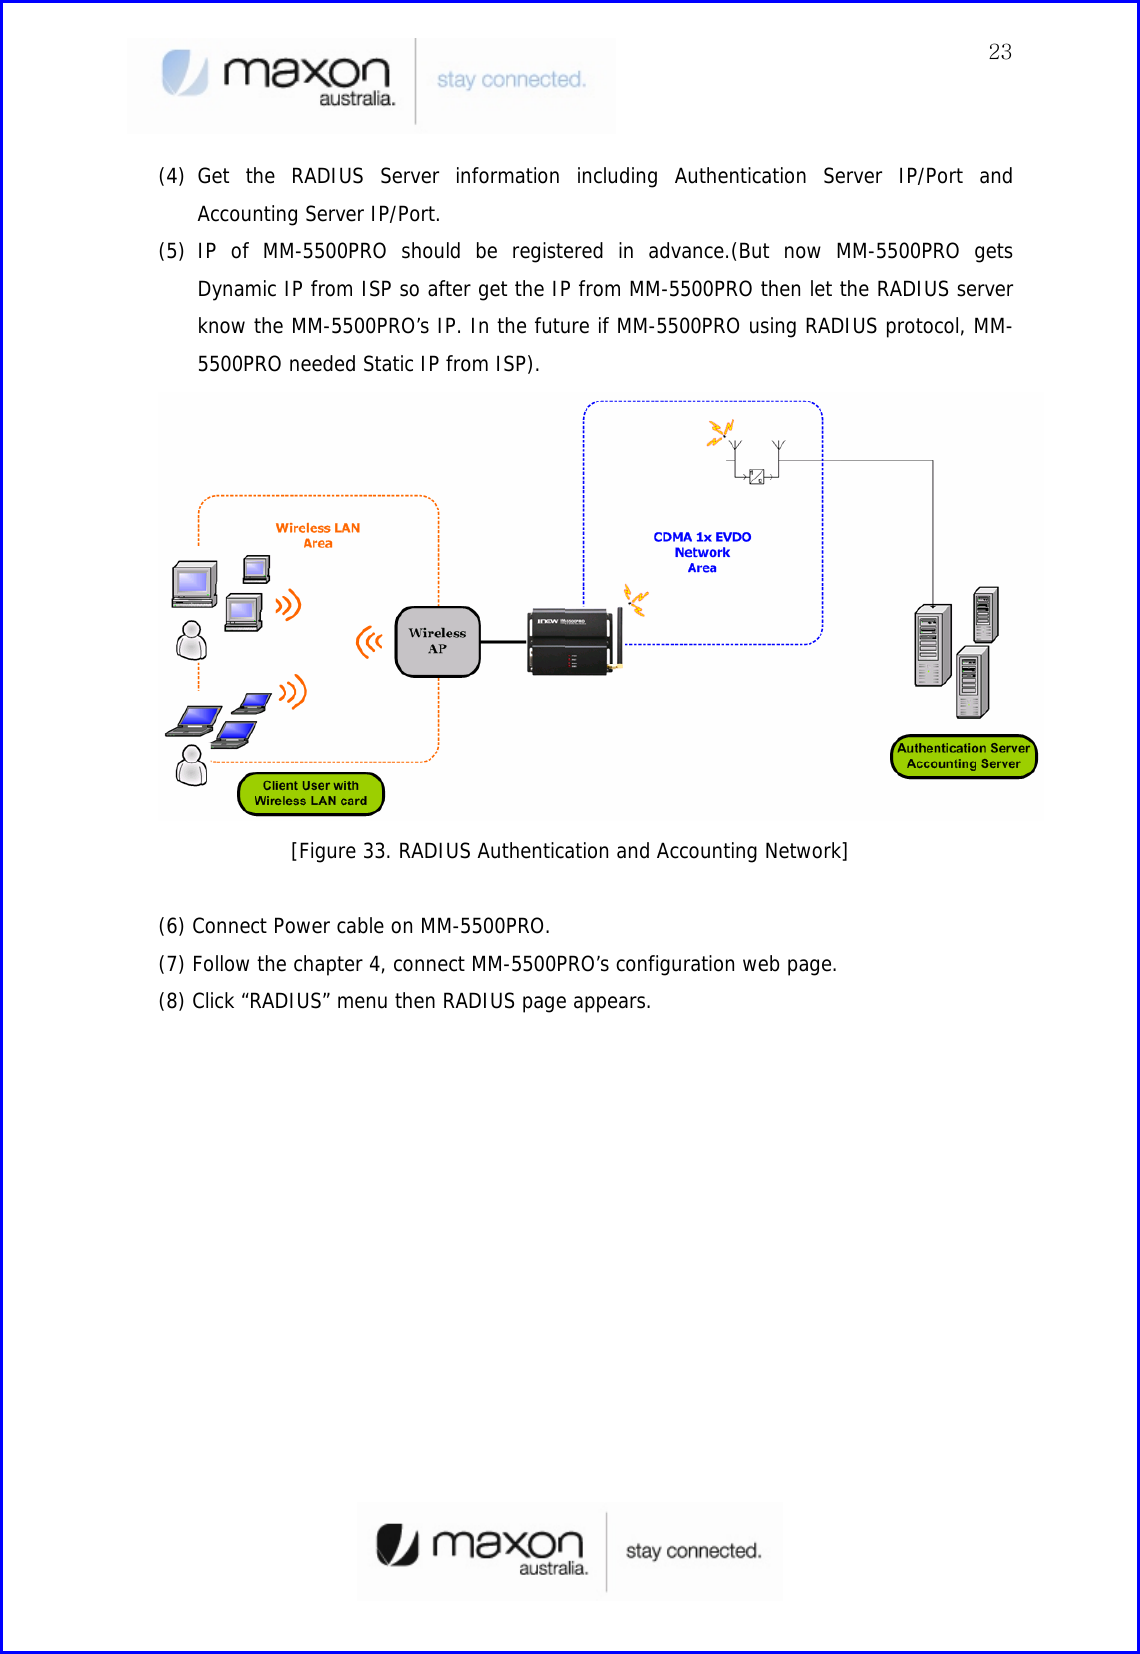  23(4) Get the RADIUS Server information including Authentication Server IP/Port and Accounting Server IP/Port. (5) IP of MM-5500PRO should be registered in advance.(But now MM-5500PRO gets Dynamic IP from ISP so after get the IP from MM-5500PRO then let the RADIUS server know the MM-5500PRO’s IP. In the future if MM-5500PRO using RADIUS protocol, MM-5500PRO needed Static IP from ISP).  [Figure 33. RADIUS Authentication and Accounting Network]  (6) Connect Power cable on MM-5500PRO. (7) Follow the chapter 4, connect MM-5500PRO’s configuration web page. (8) Click “RADIUS” menu then RADIUS page appears.   